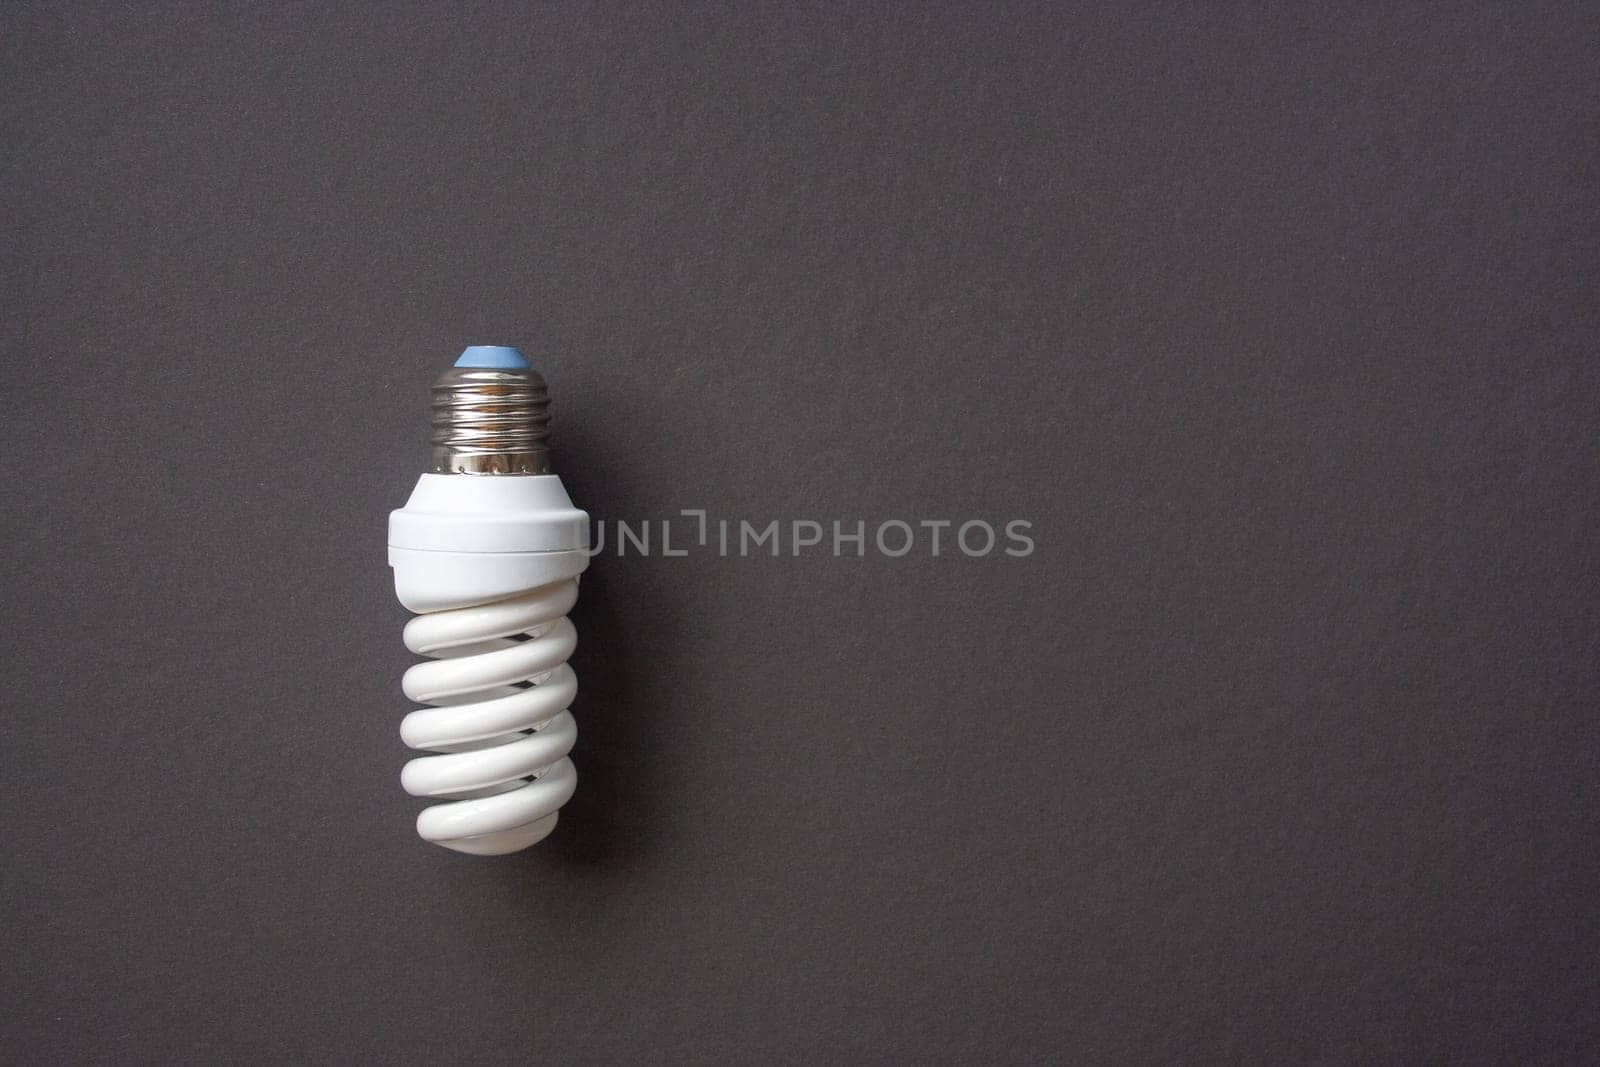 Energy saving light bulb on a black background by Quils